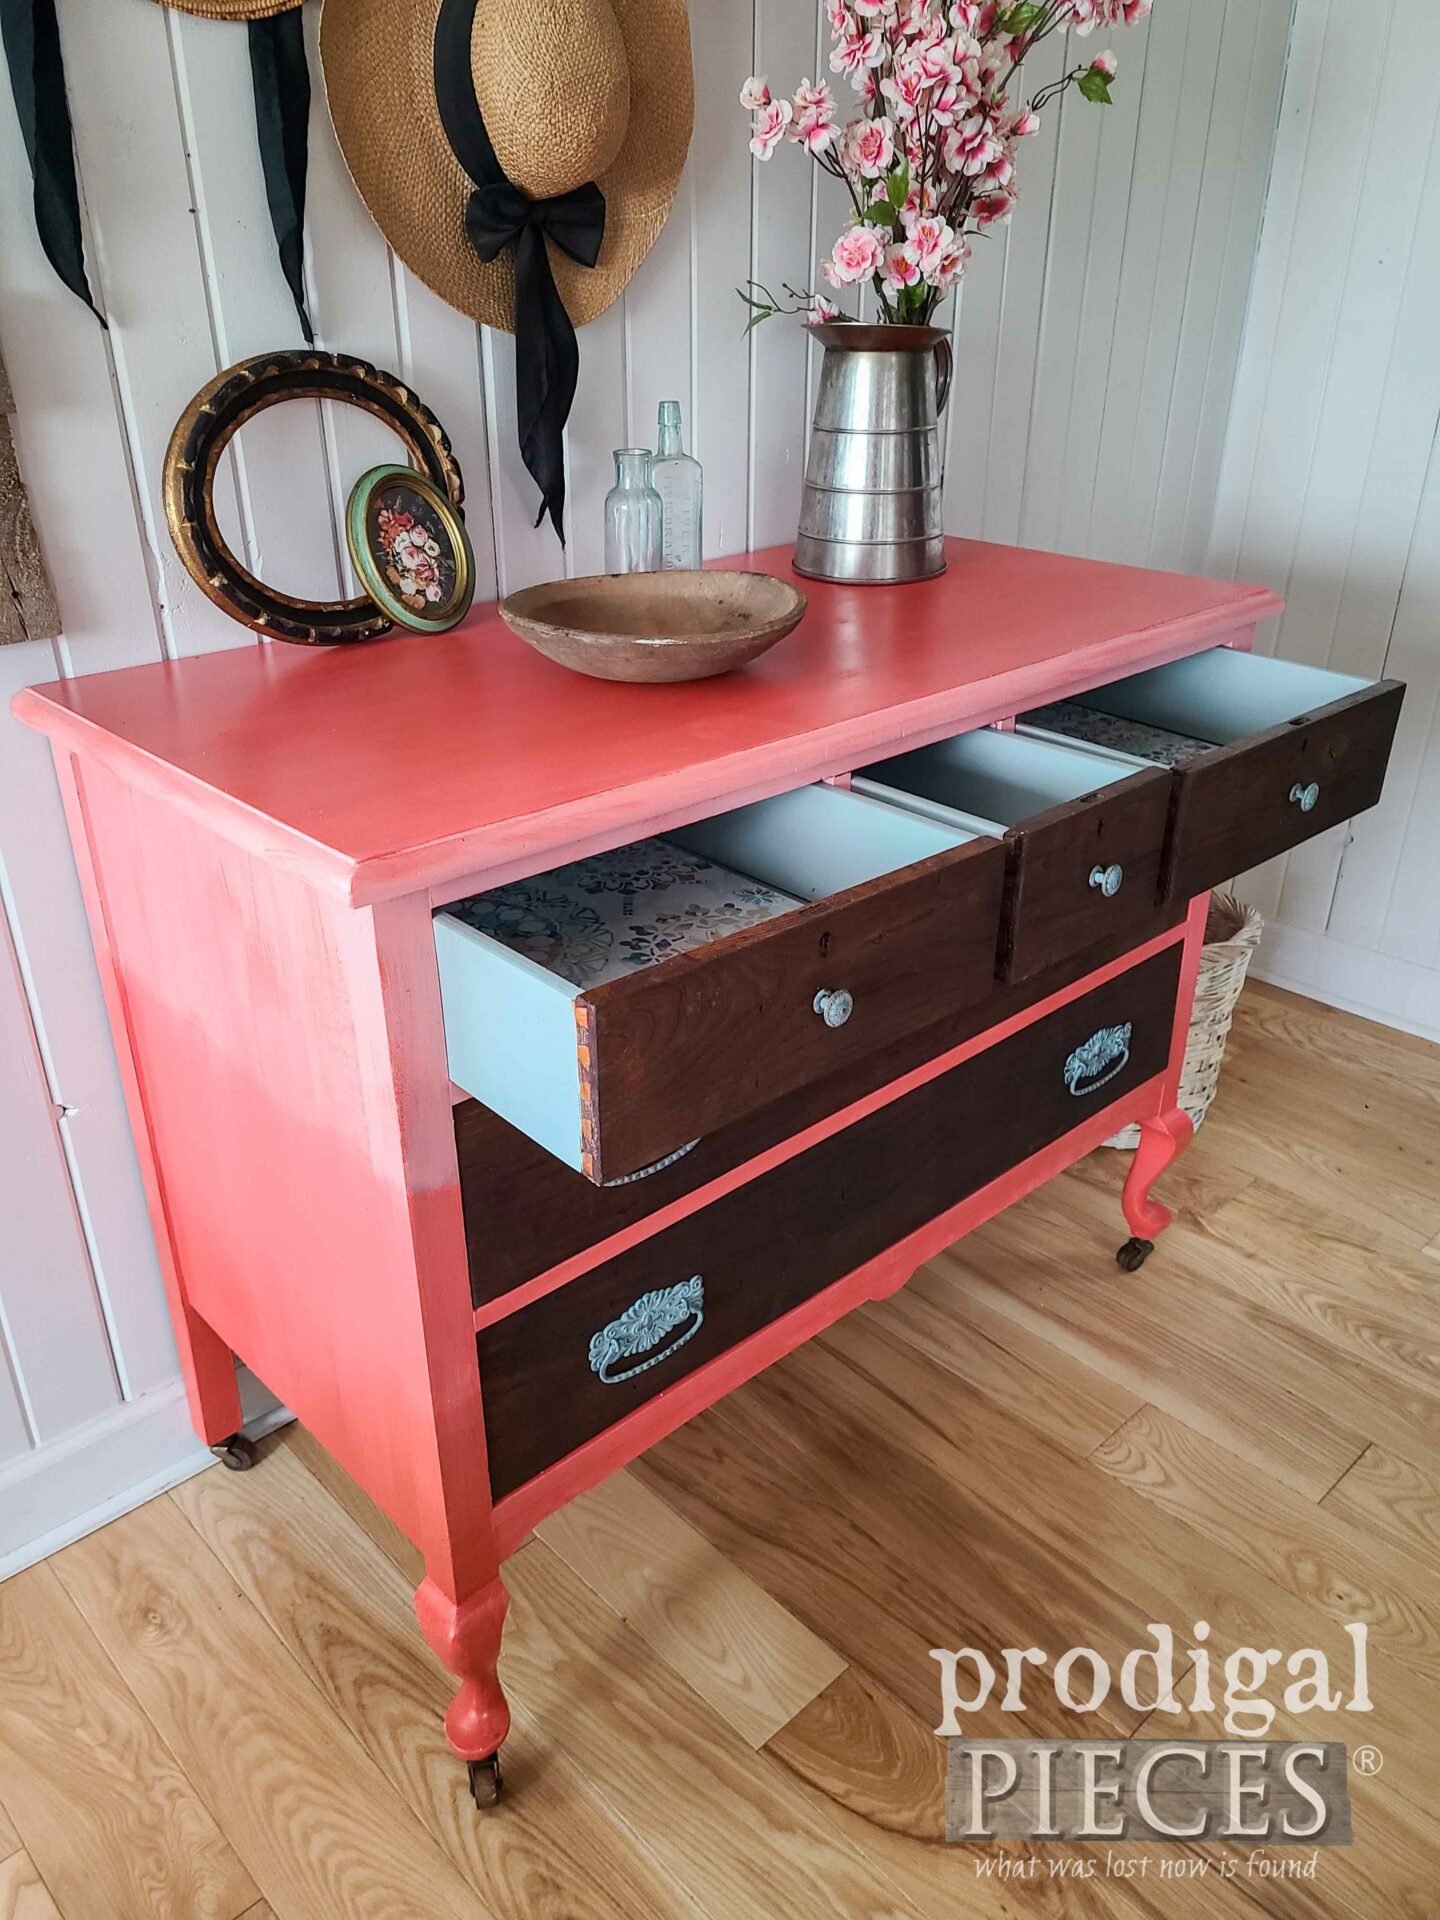 Side View of Open Drawers on Damaged Antique Dresser by Larissa of Prodigal Pieces | prodigalpieces.com #prodigalpieces #antique #diy #boho